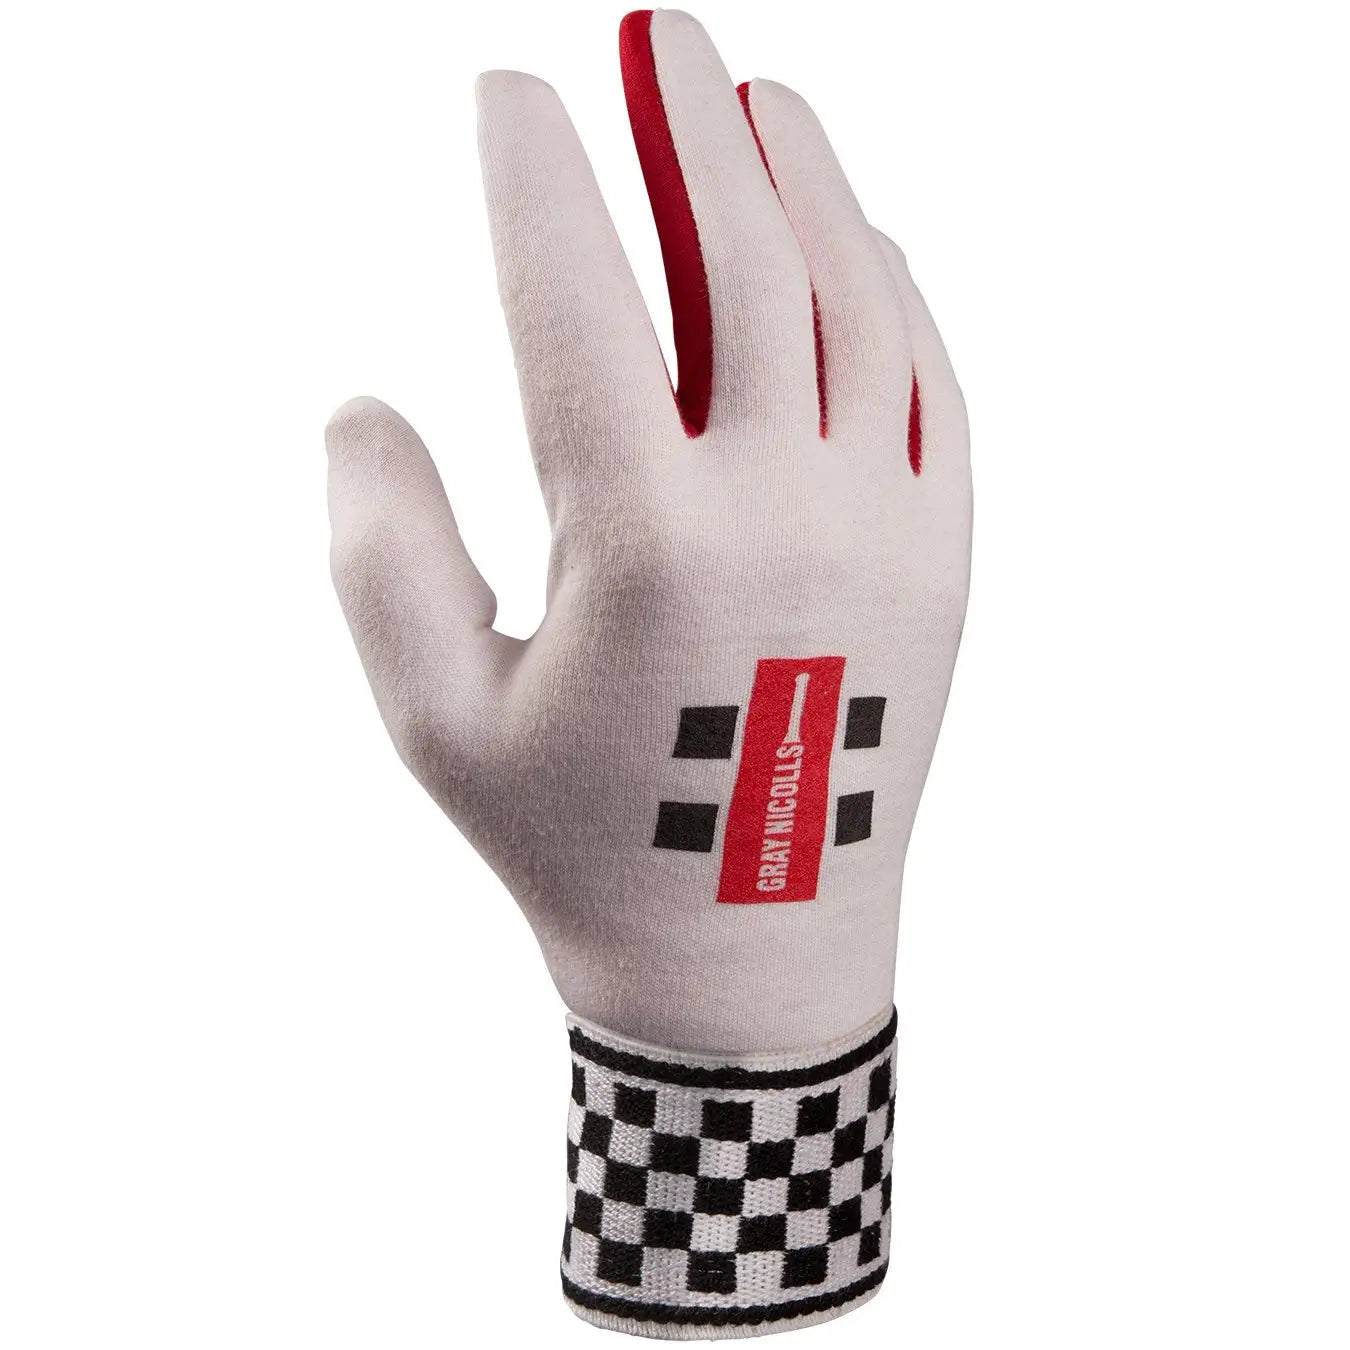 Gray Nicolls Inner Gloves Chamois Plain for Wicket Keeping - GLOVE - WICKET KEEPING